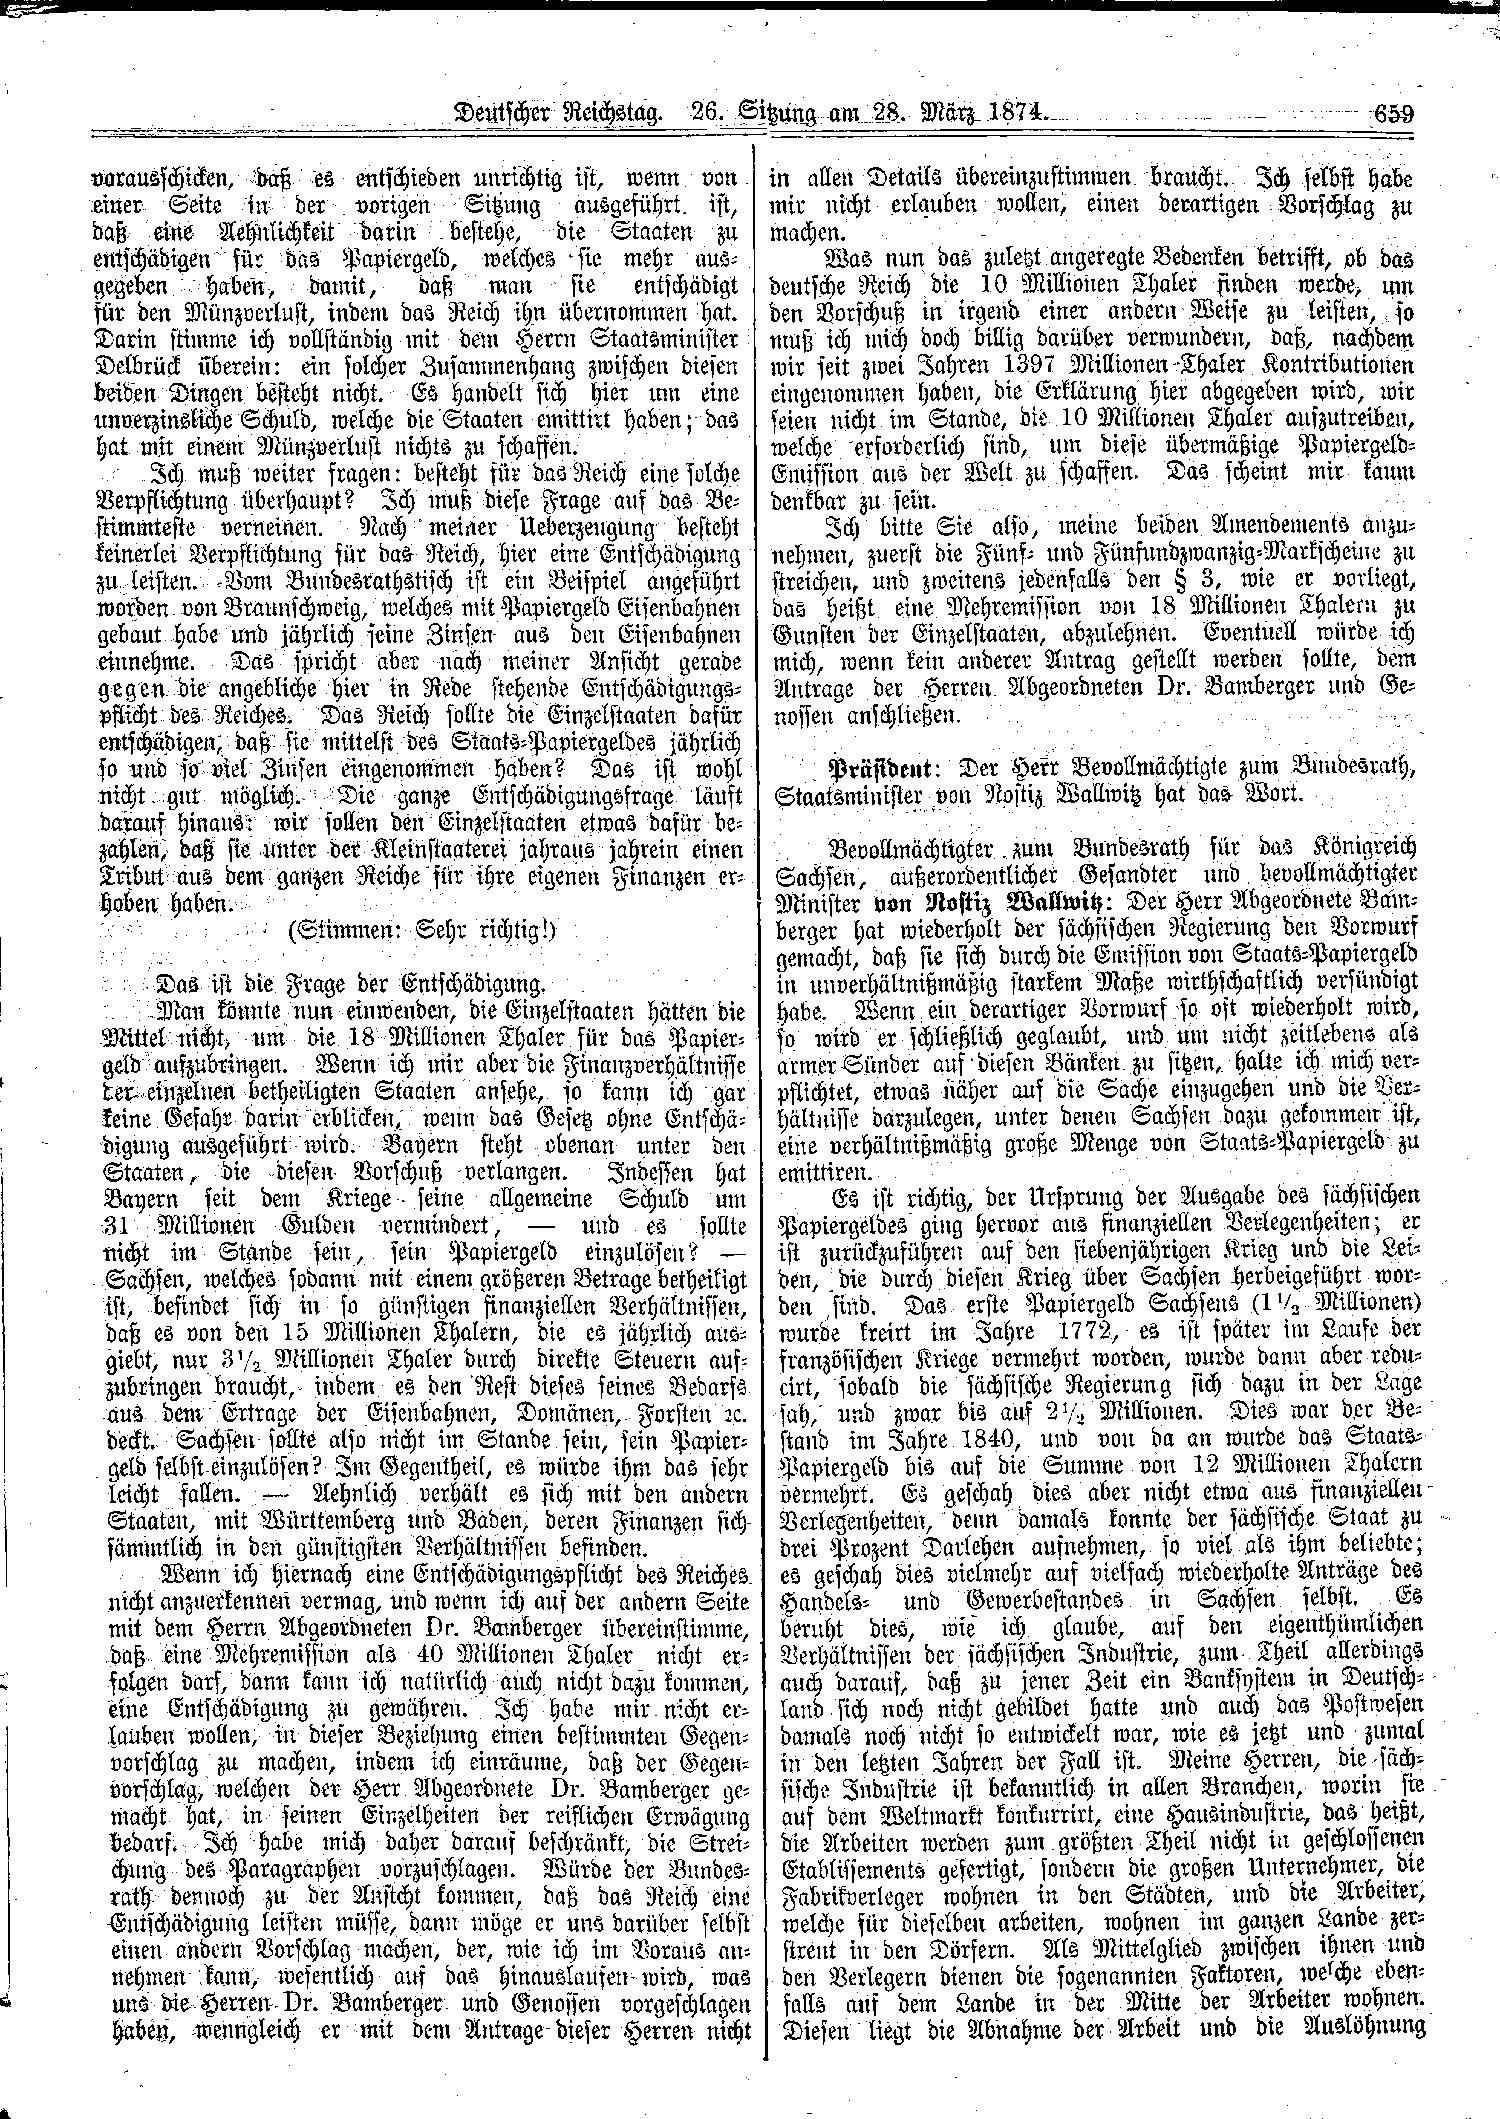 Scan of page 659